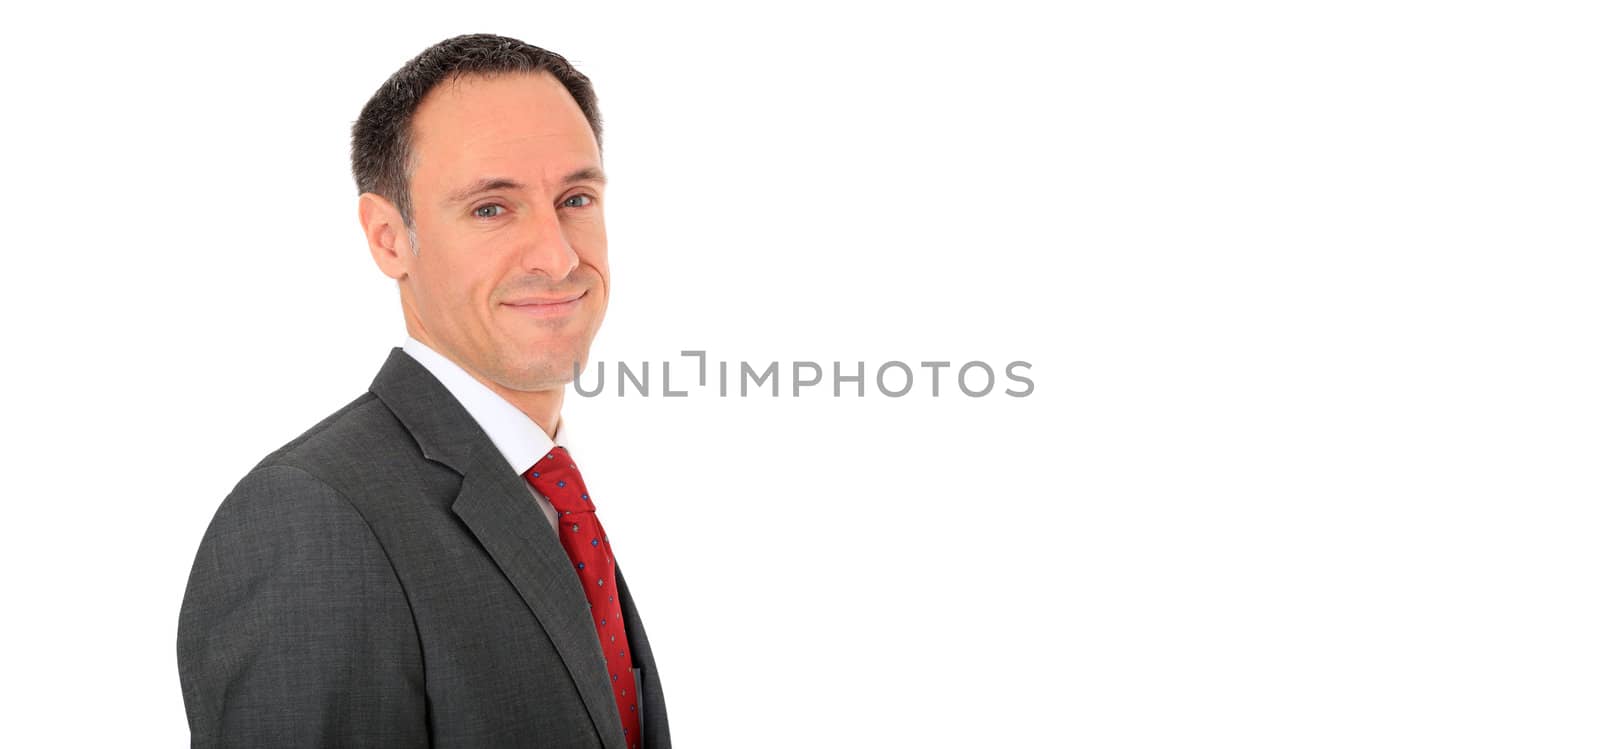 Attractive businessman. All on white background.